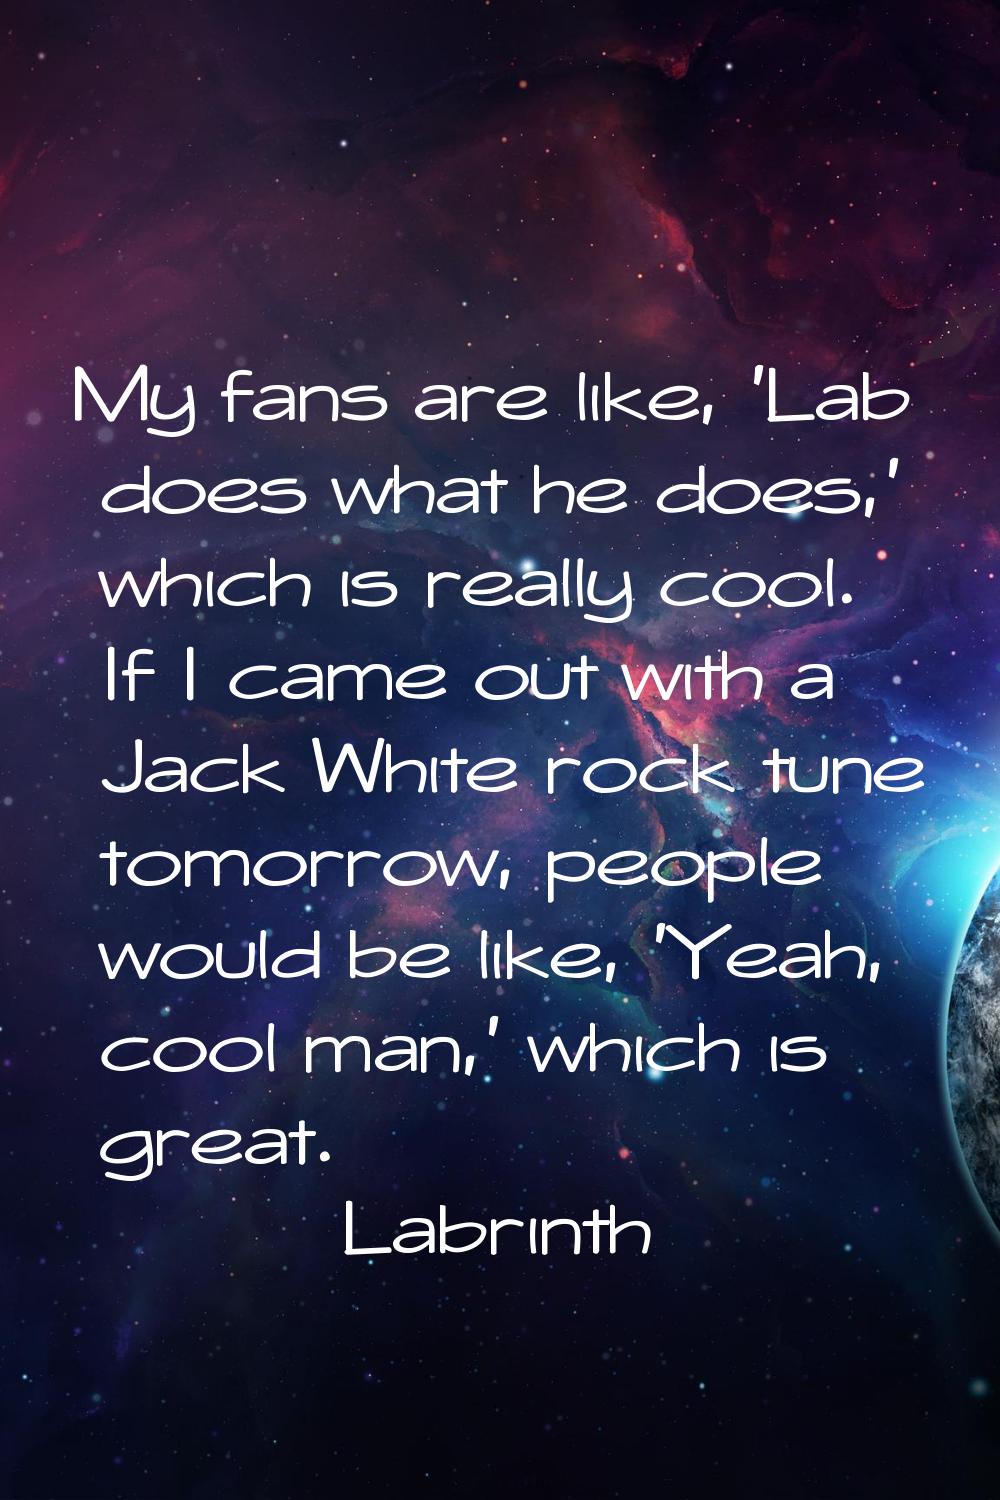 My fans are like, 'Lab does what he does,' which is really cool. If I came out with a Jack White ro